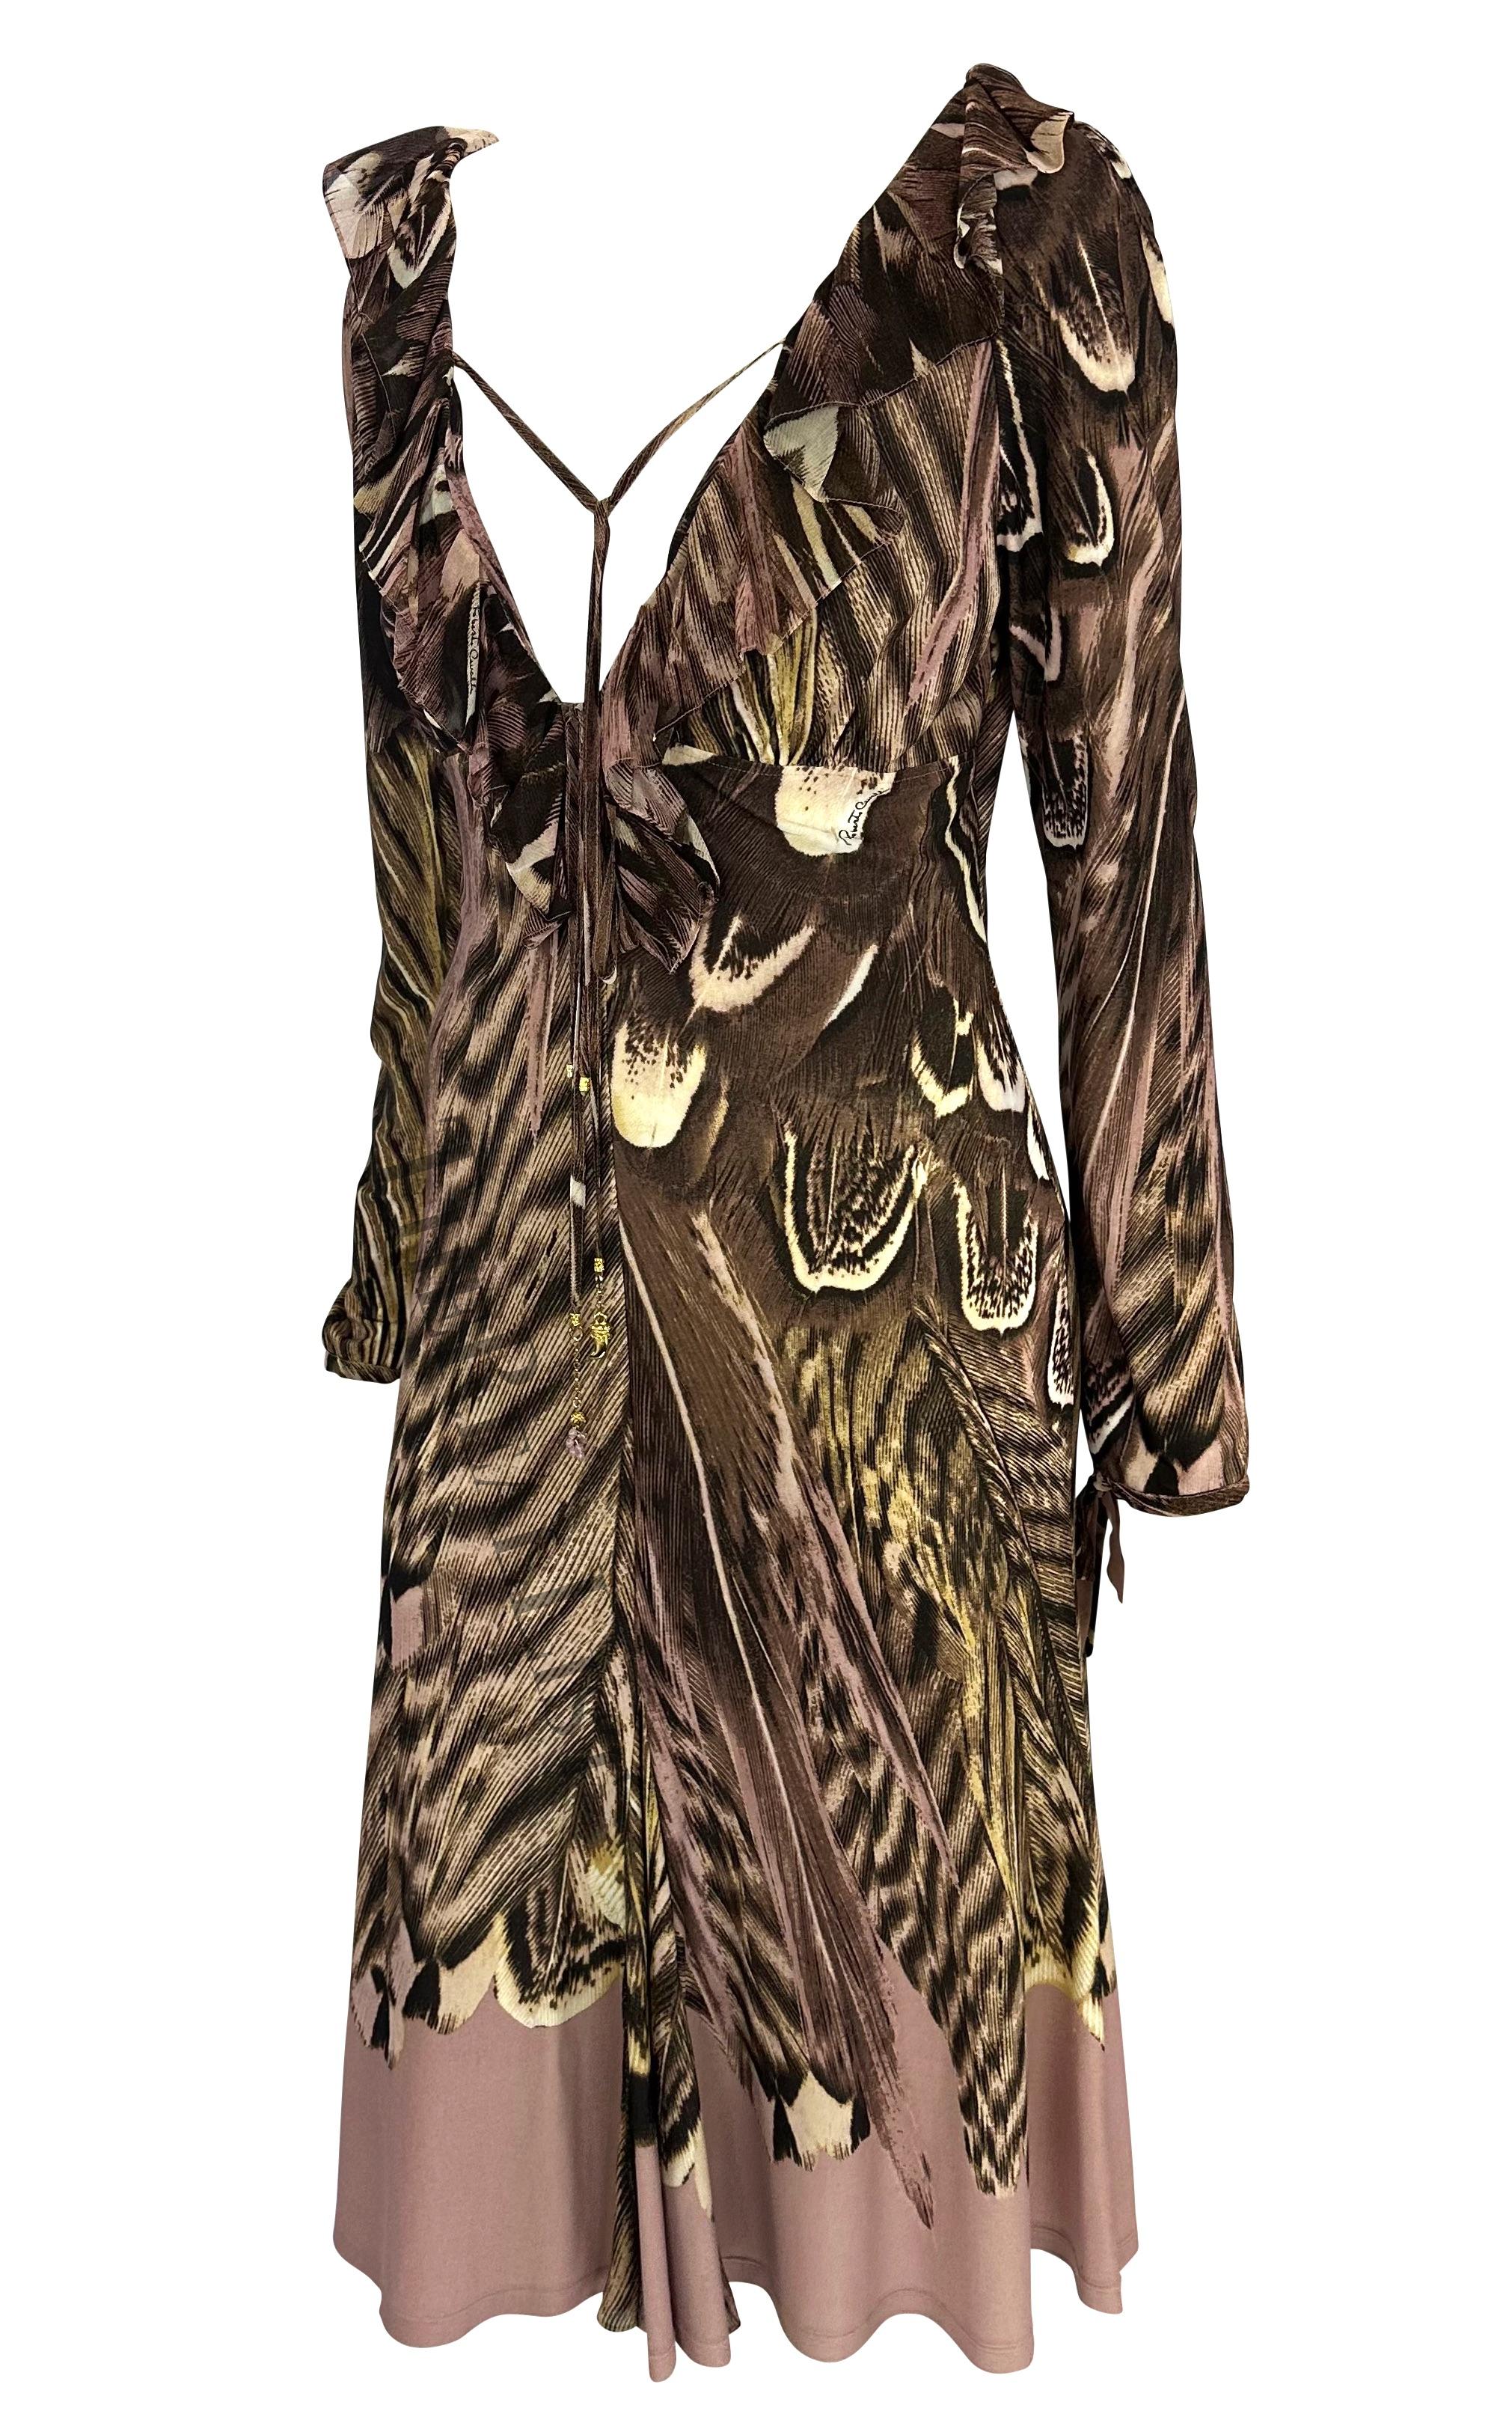 S/S 2005 Roberto Cavalli Pink Feather Print Long Sleeve Charm Dress For Sale 1